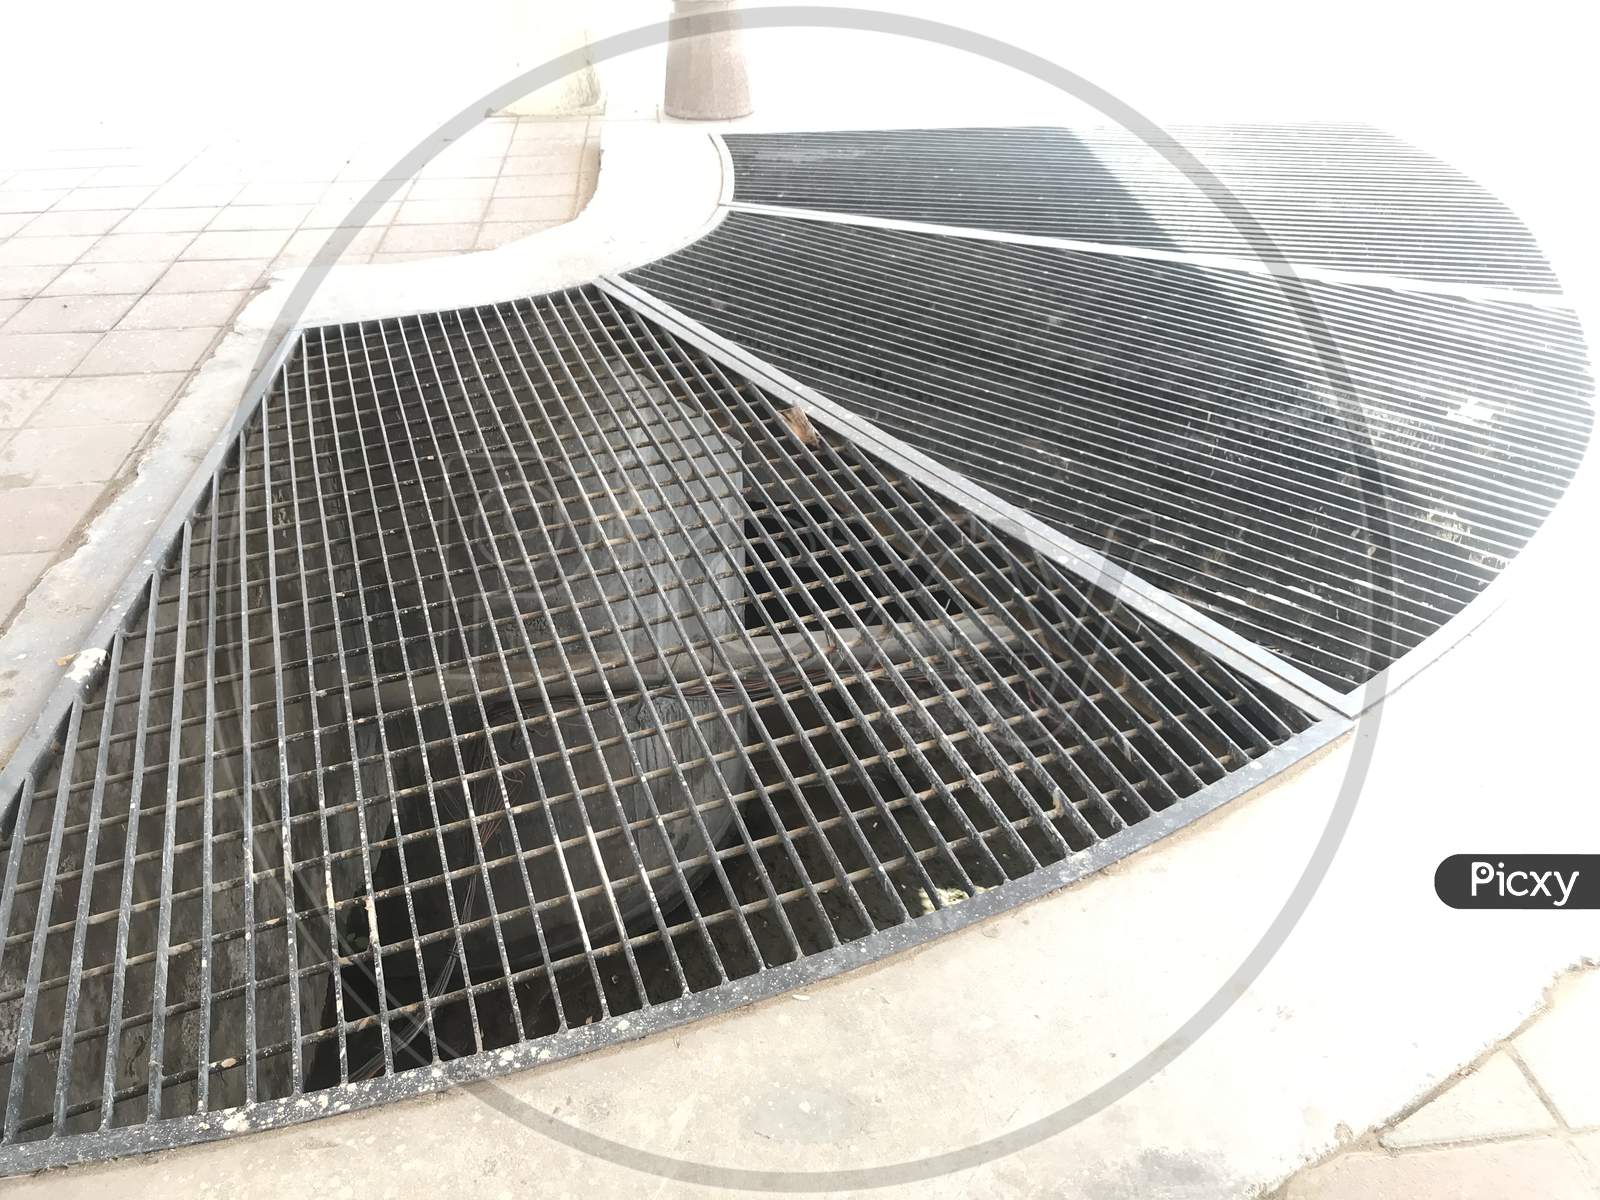 Semi Circle Shaped Manhole Cover For Public Drainage Pit And Made Of Galvanized Iron Materials